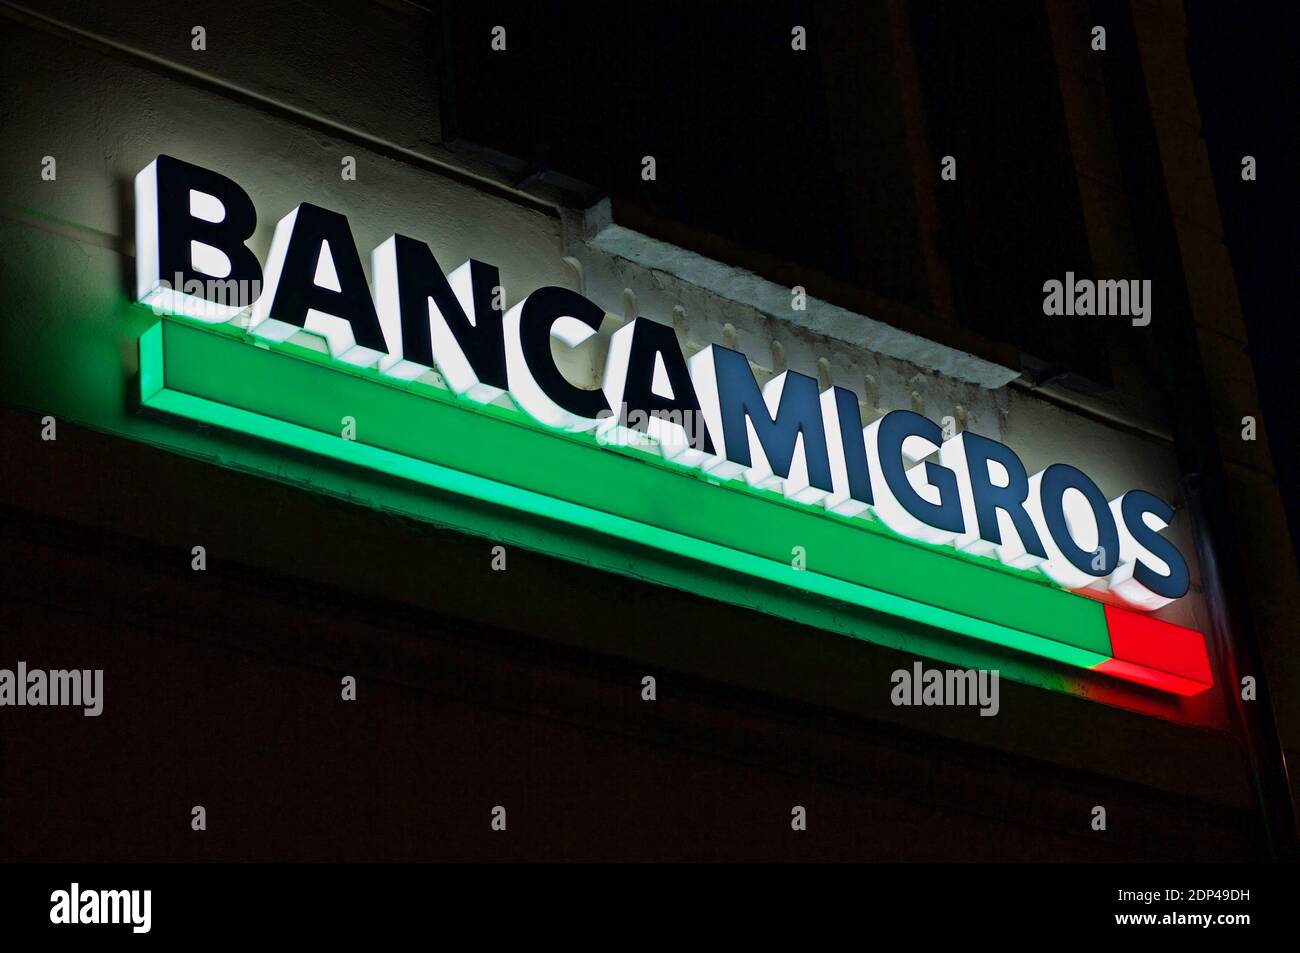 Lugano, Ticino, Switzerland - 25th November 2020 : Luminous Banca Migros (also known as Migros Bank) sign hanging on the building in the city of Lugan Stock Photo